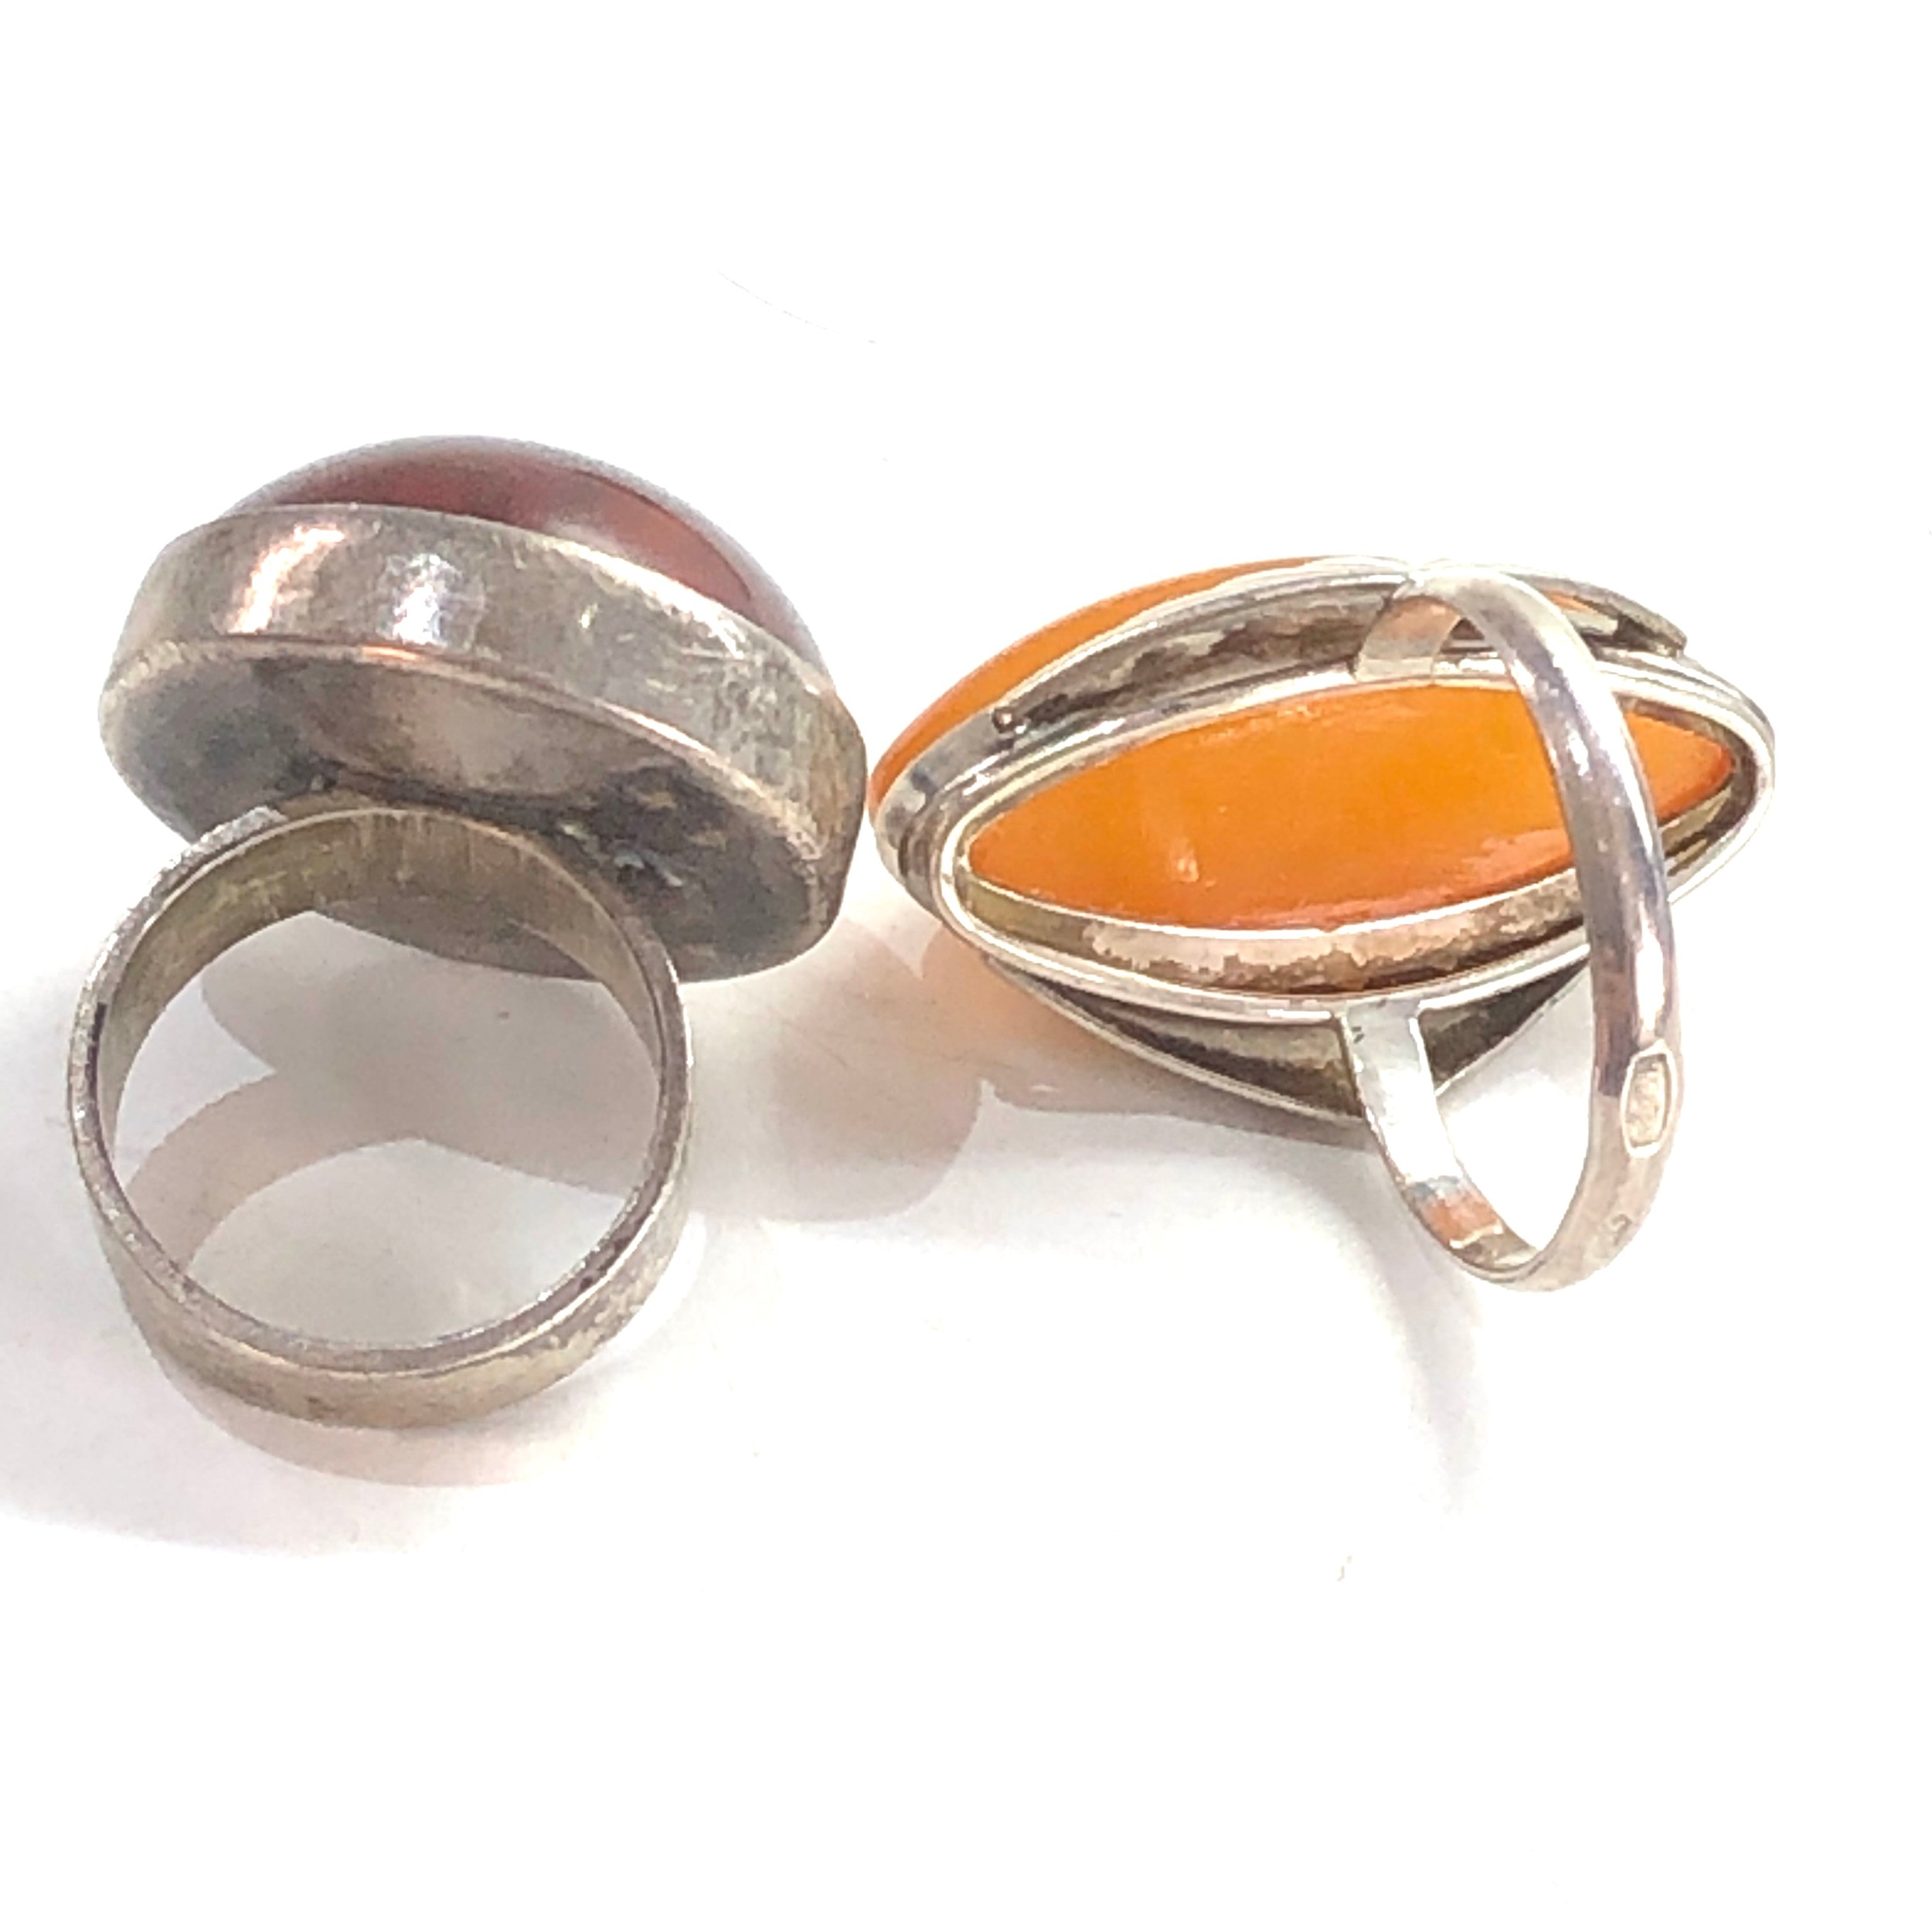 2 silver & amber set rings - Image 3 of 3